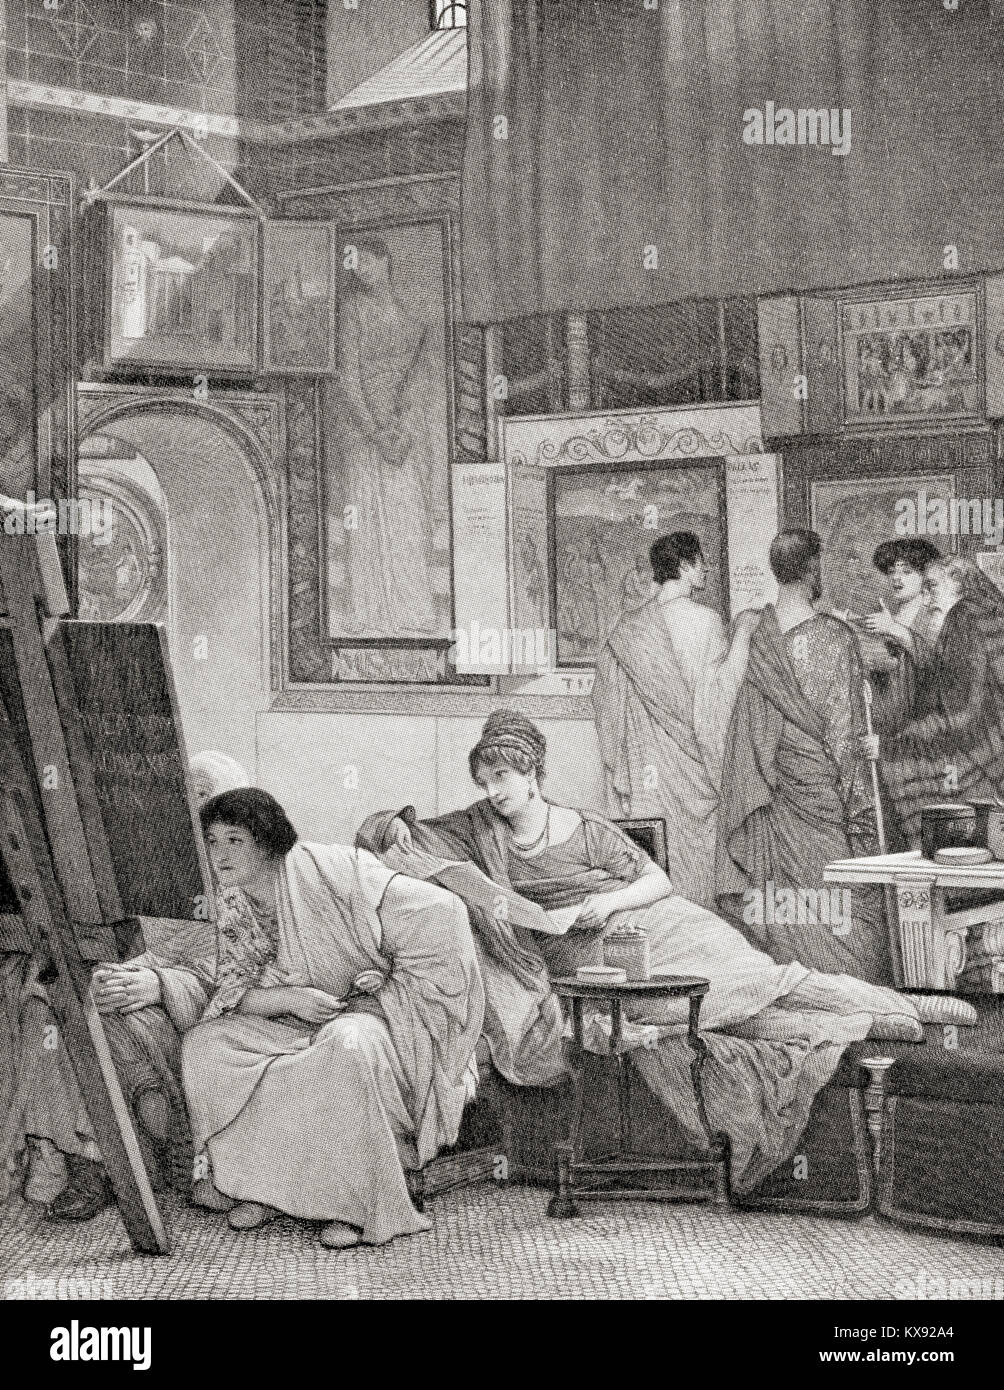 A Roman art gallery.  From Hutchinson's History of the Nations, published 1915. Stock Photo